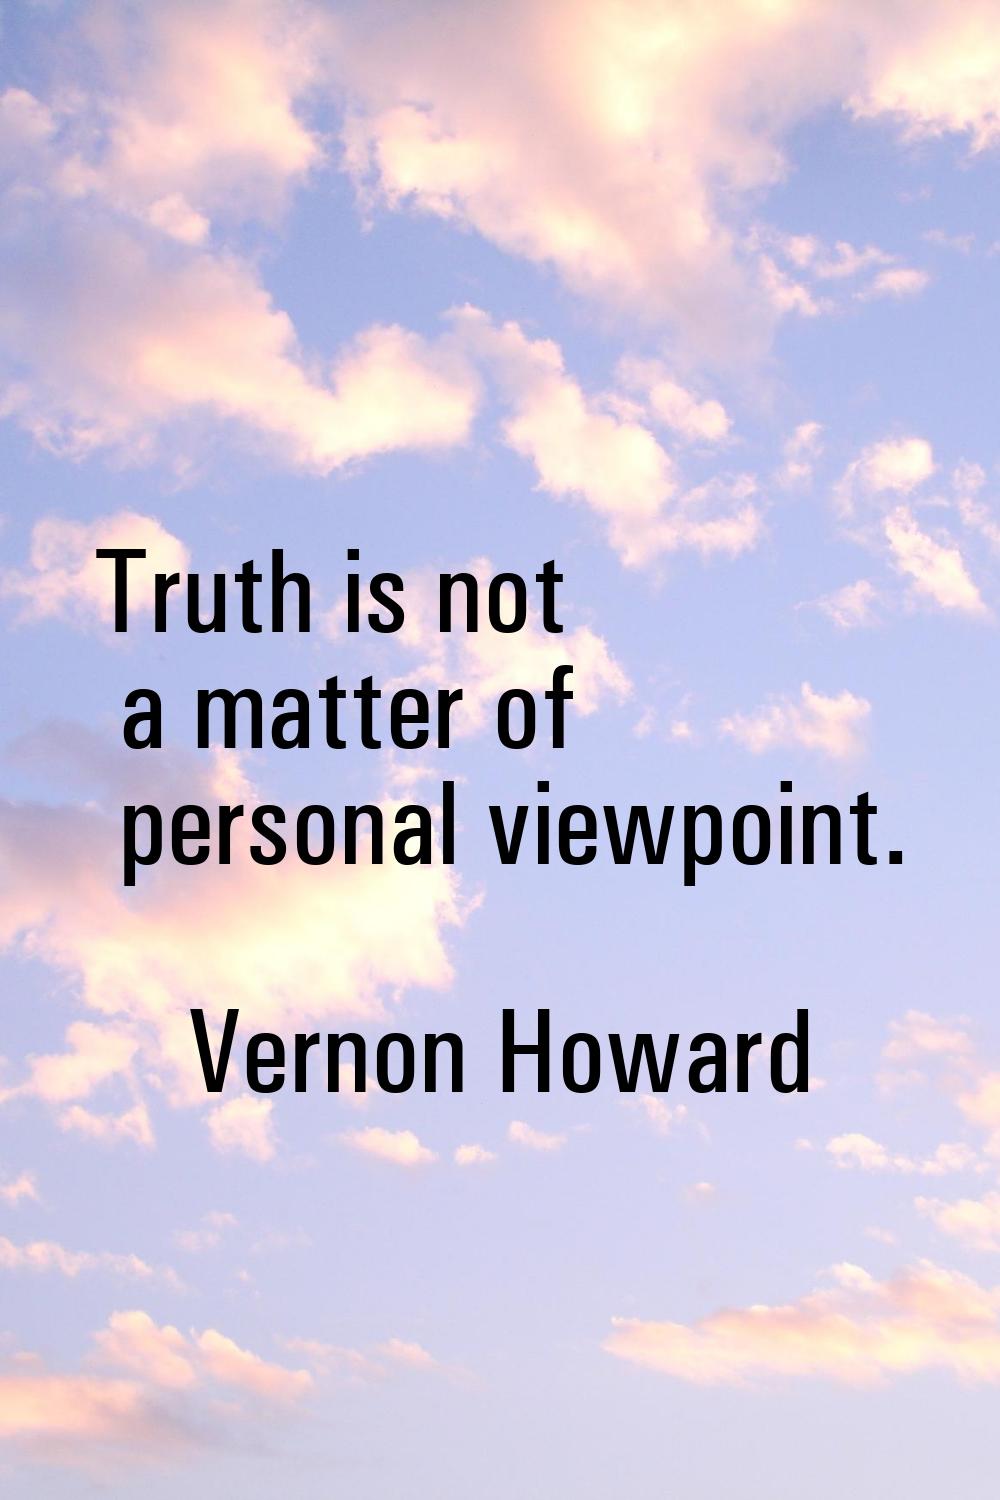 Truth is not a matter of personal viewpoint.